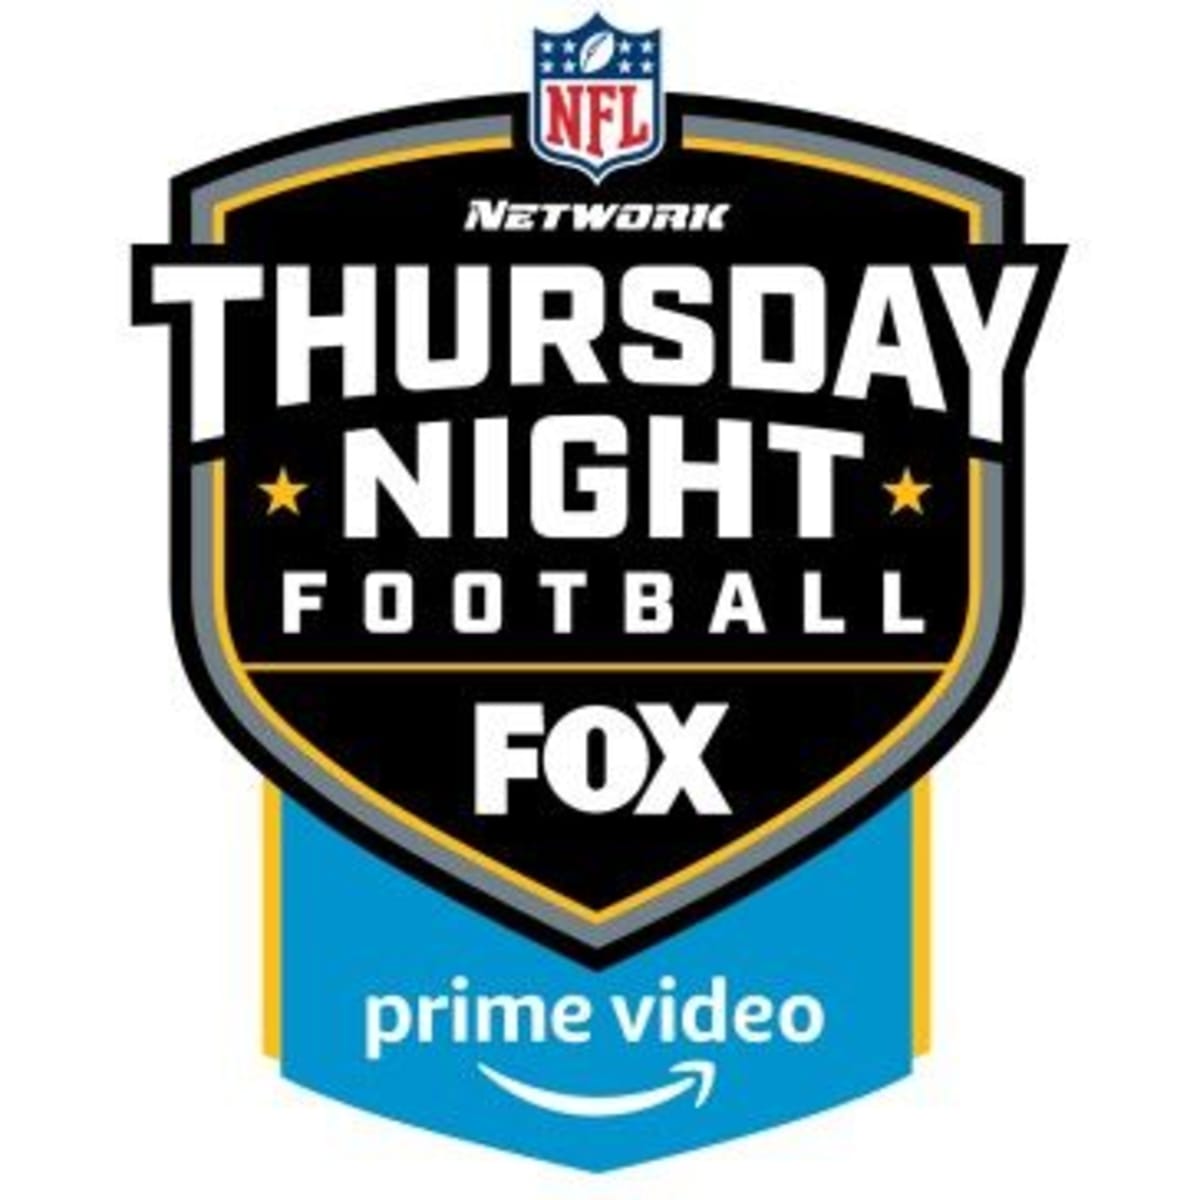 NFL schedule on Amazon Prime How to watch Thursday Night Football